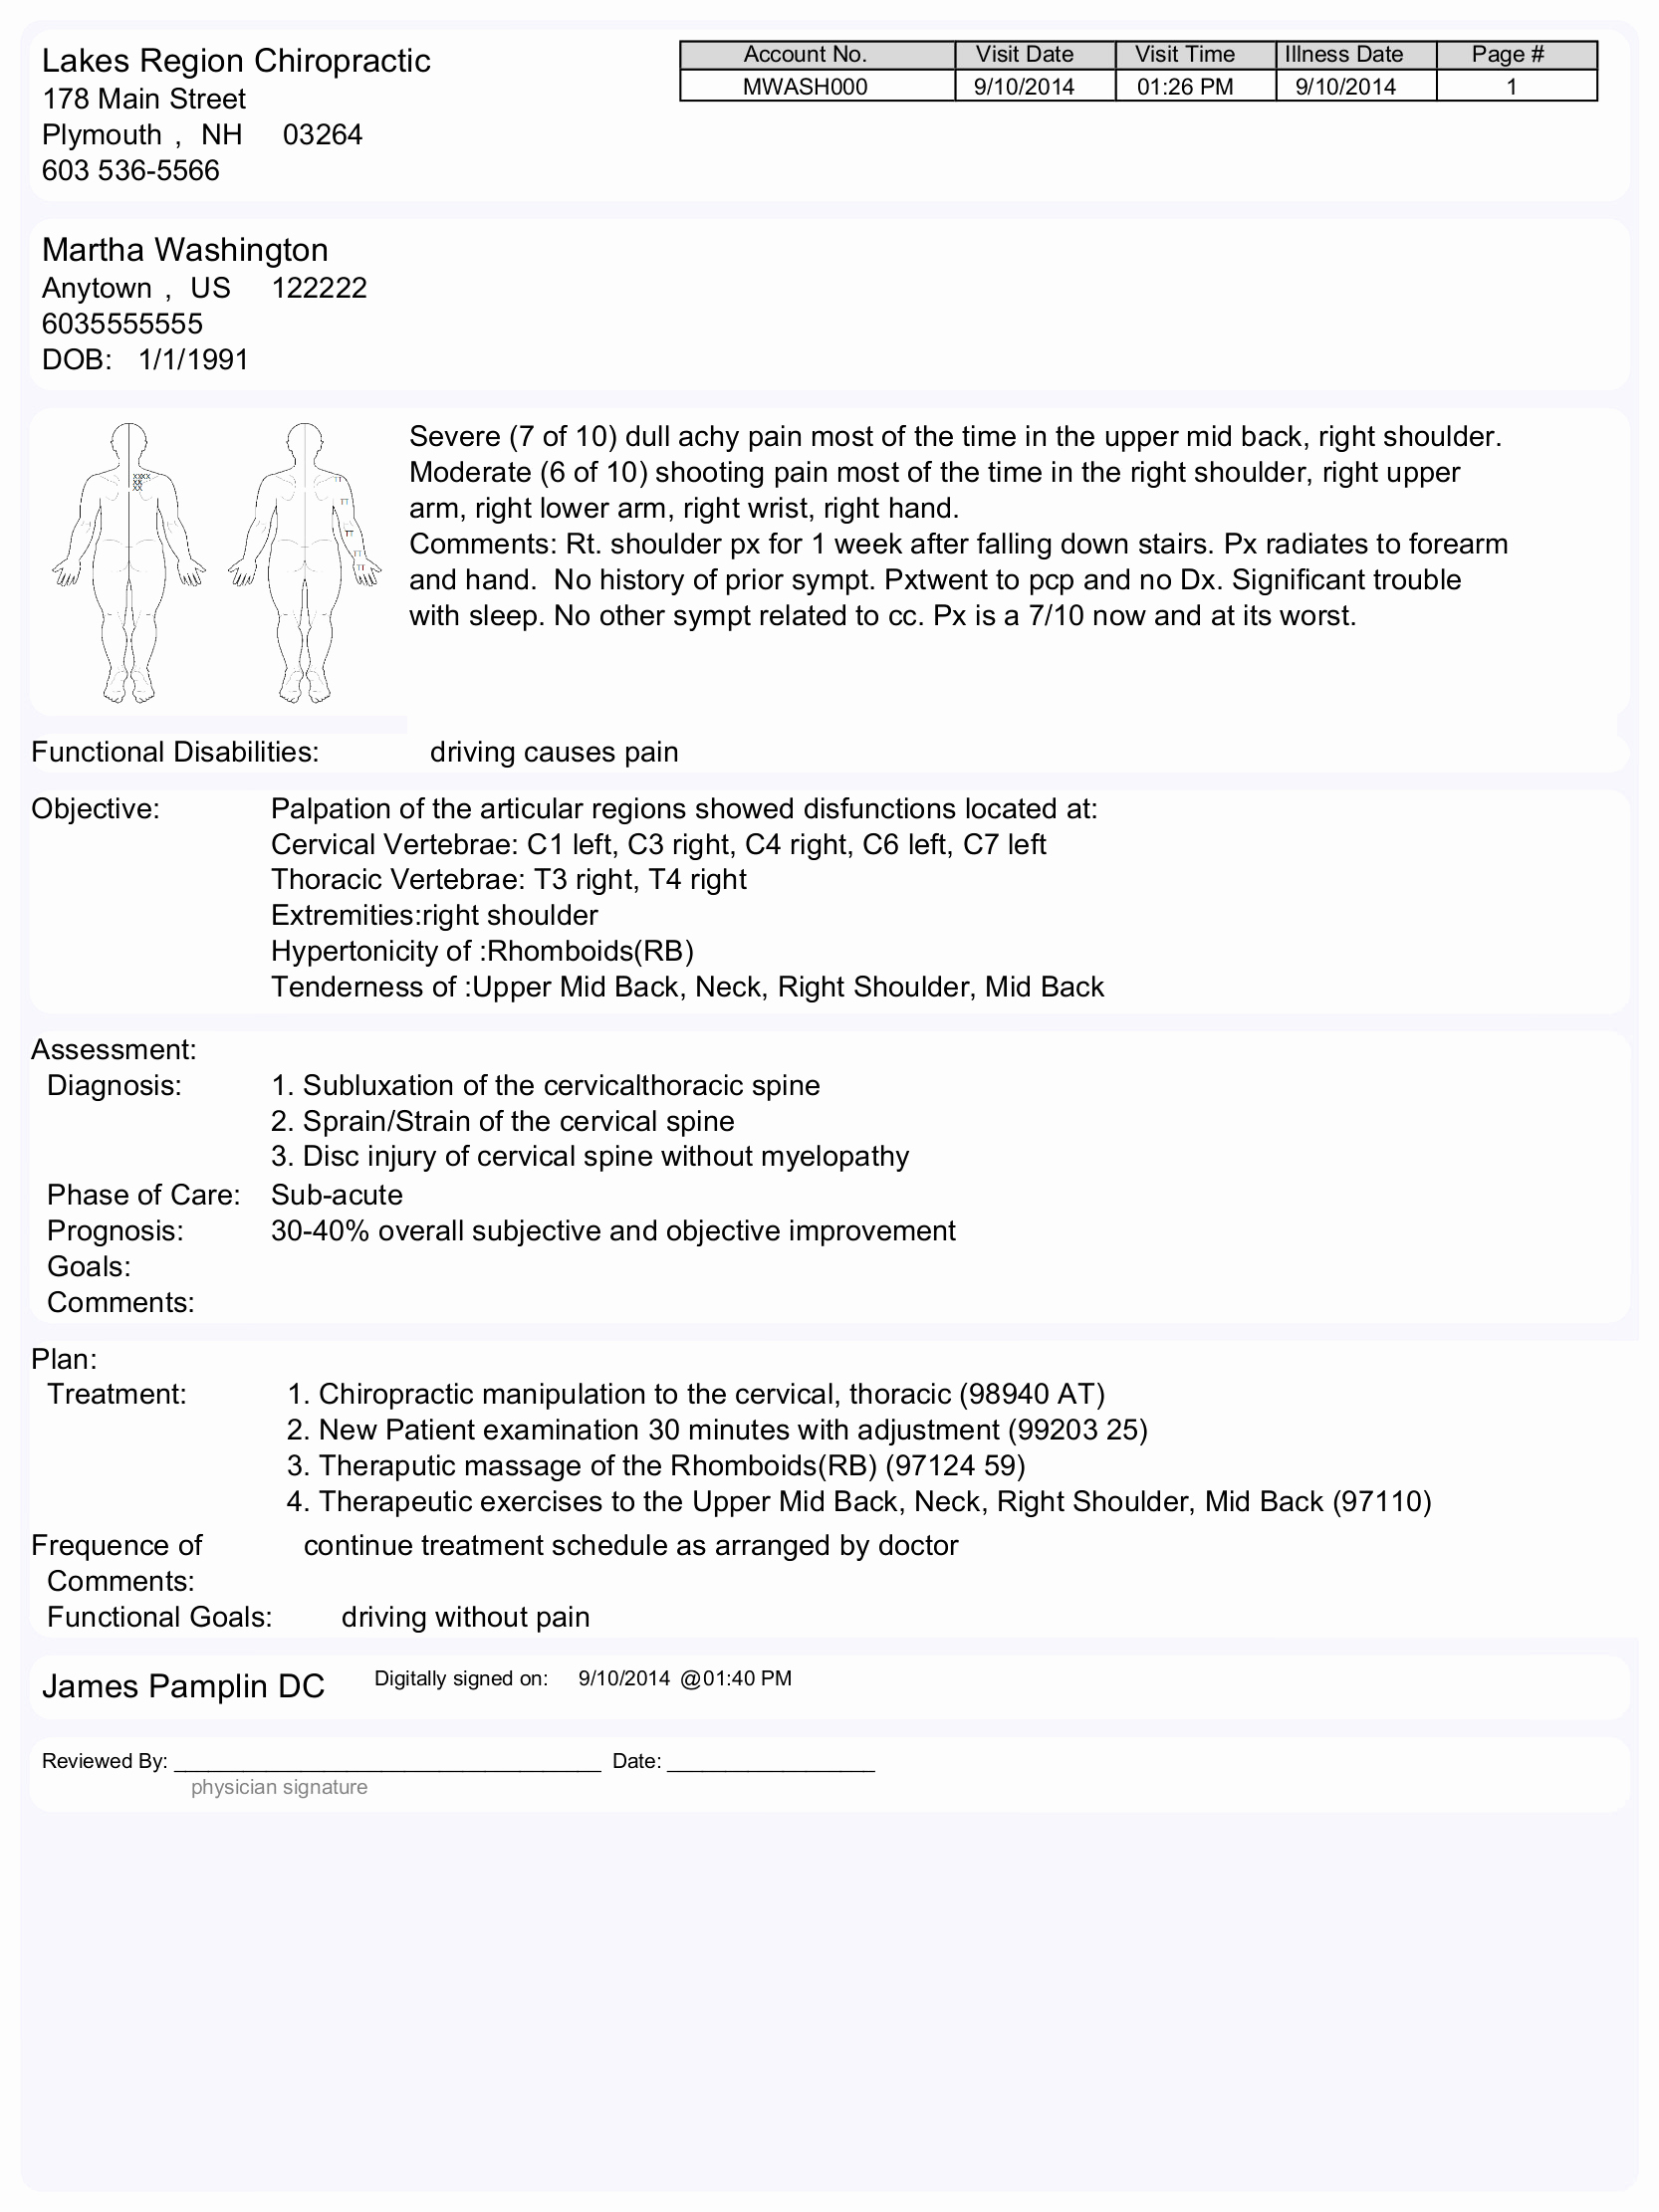 Chiropractic soap Note Example Best Of 3 Page Essay On Goals